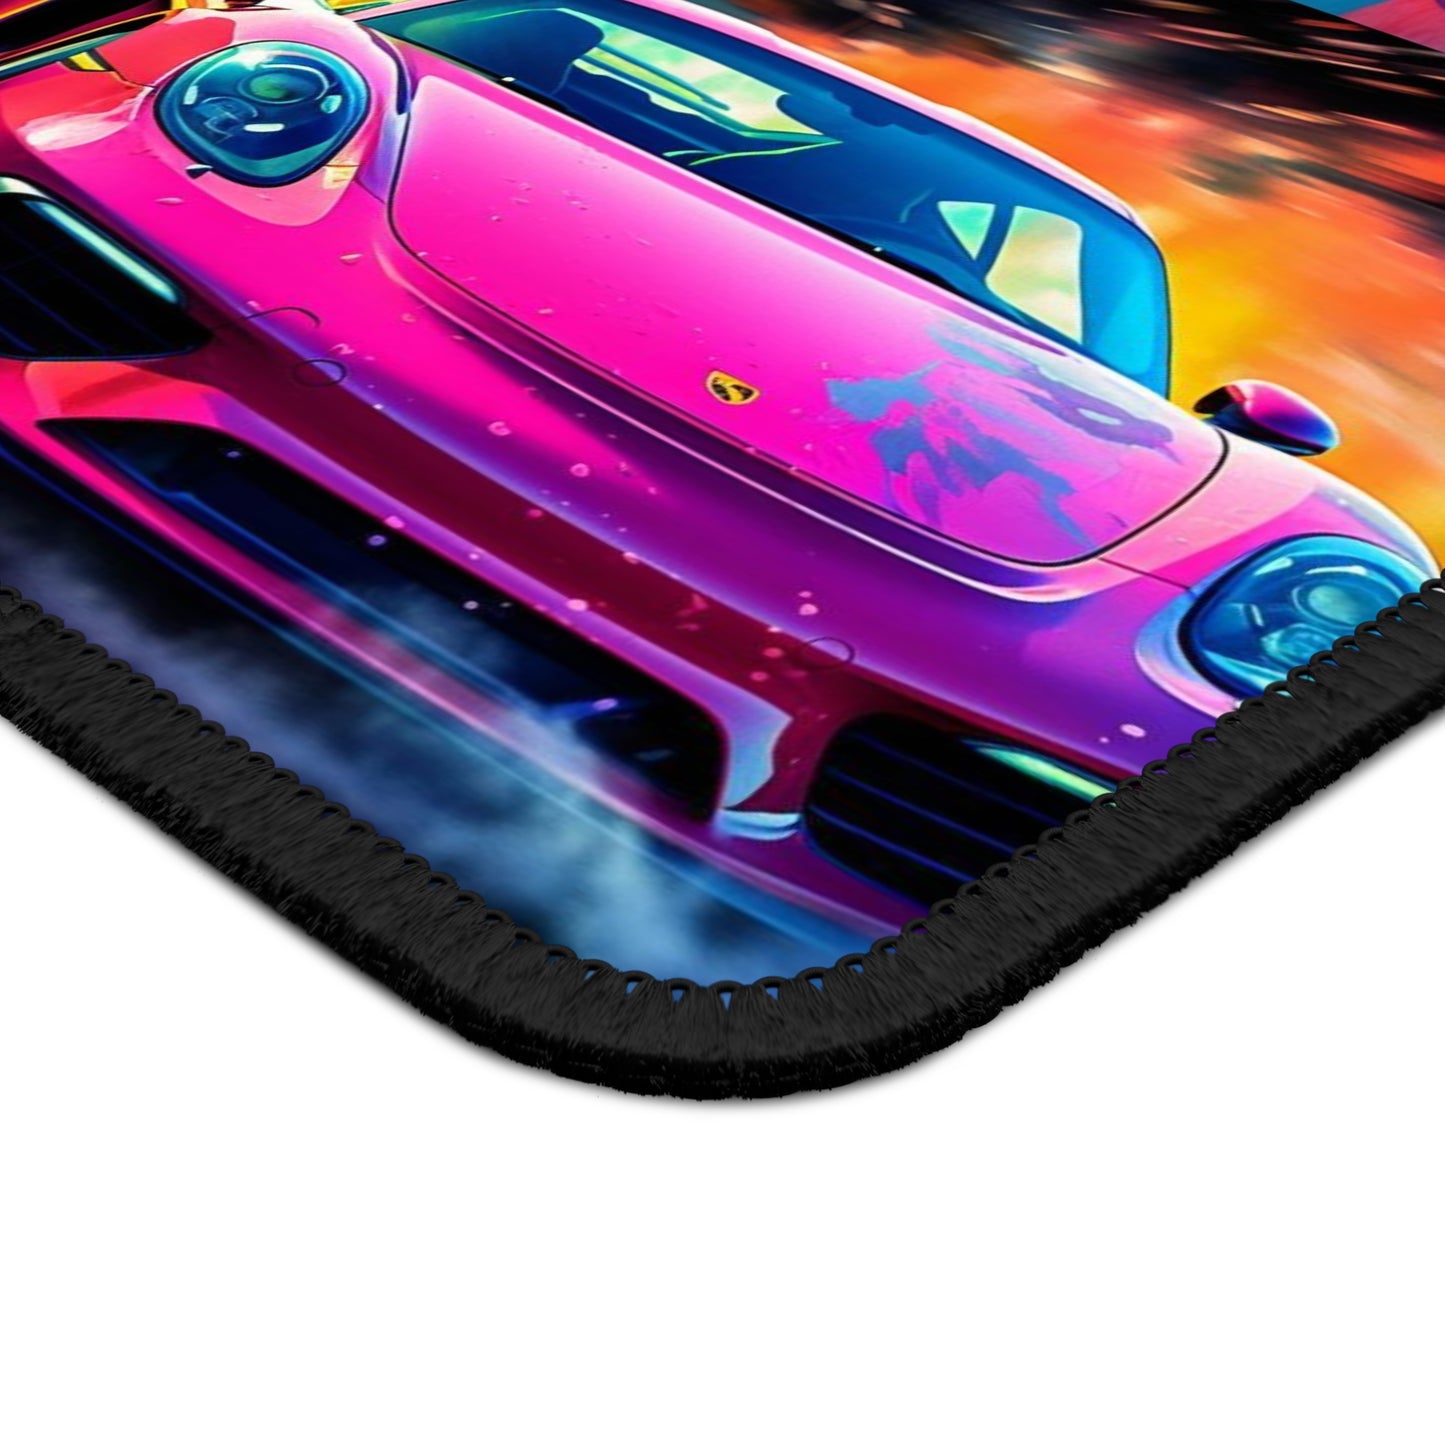 Gaming Mouse Pad  Pink Porsche water fusion 5